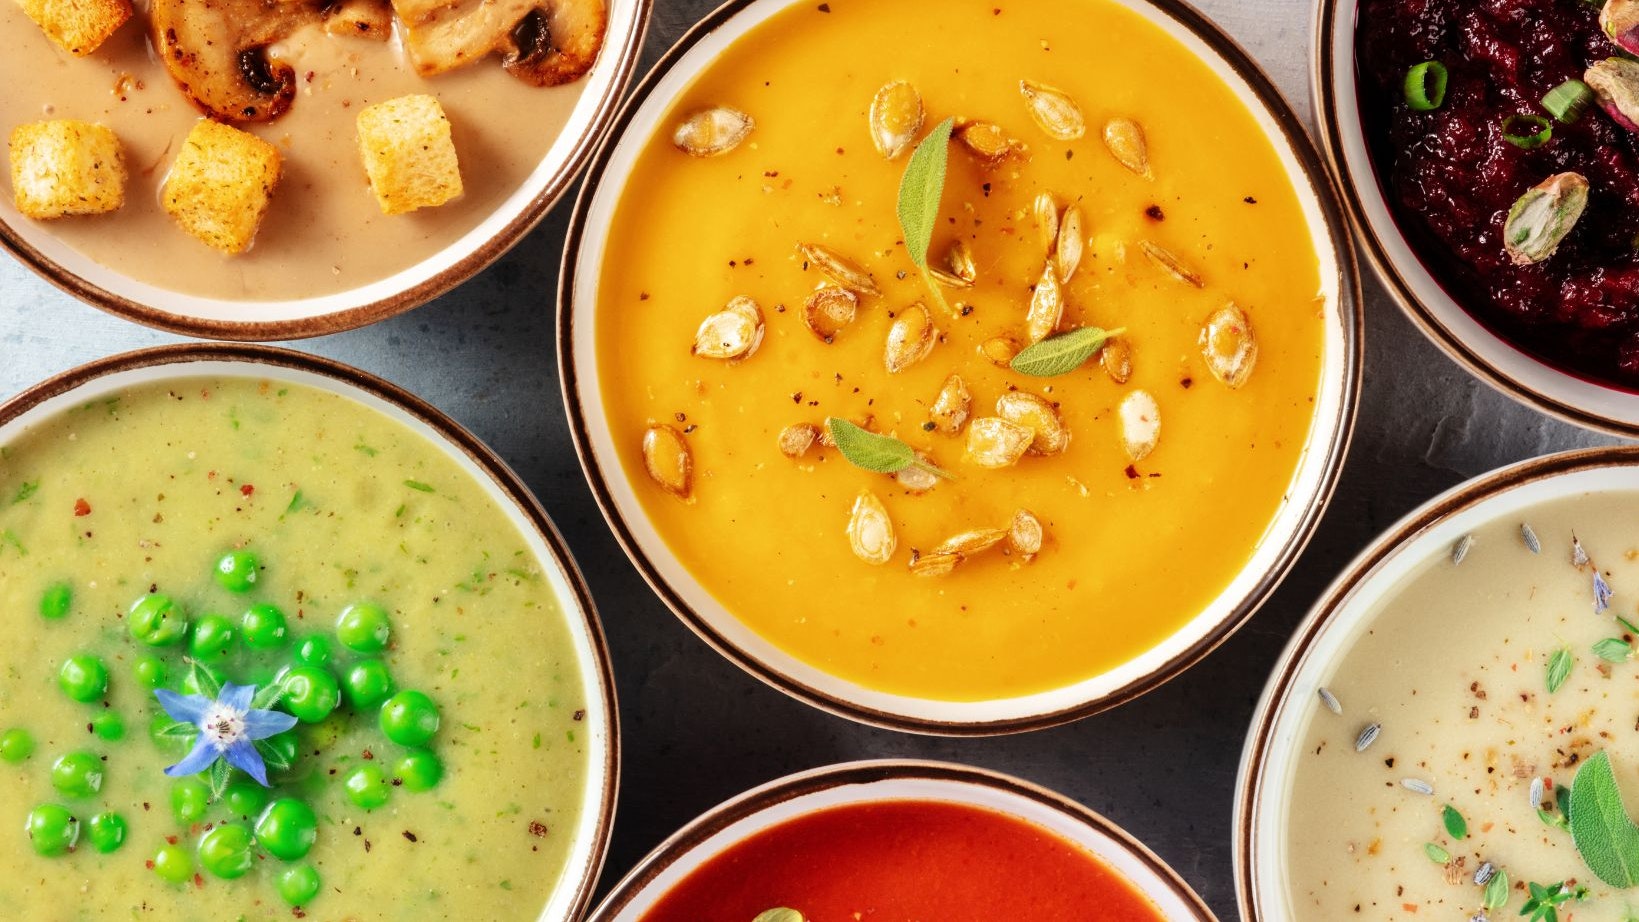 Bowls of different soups